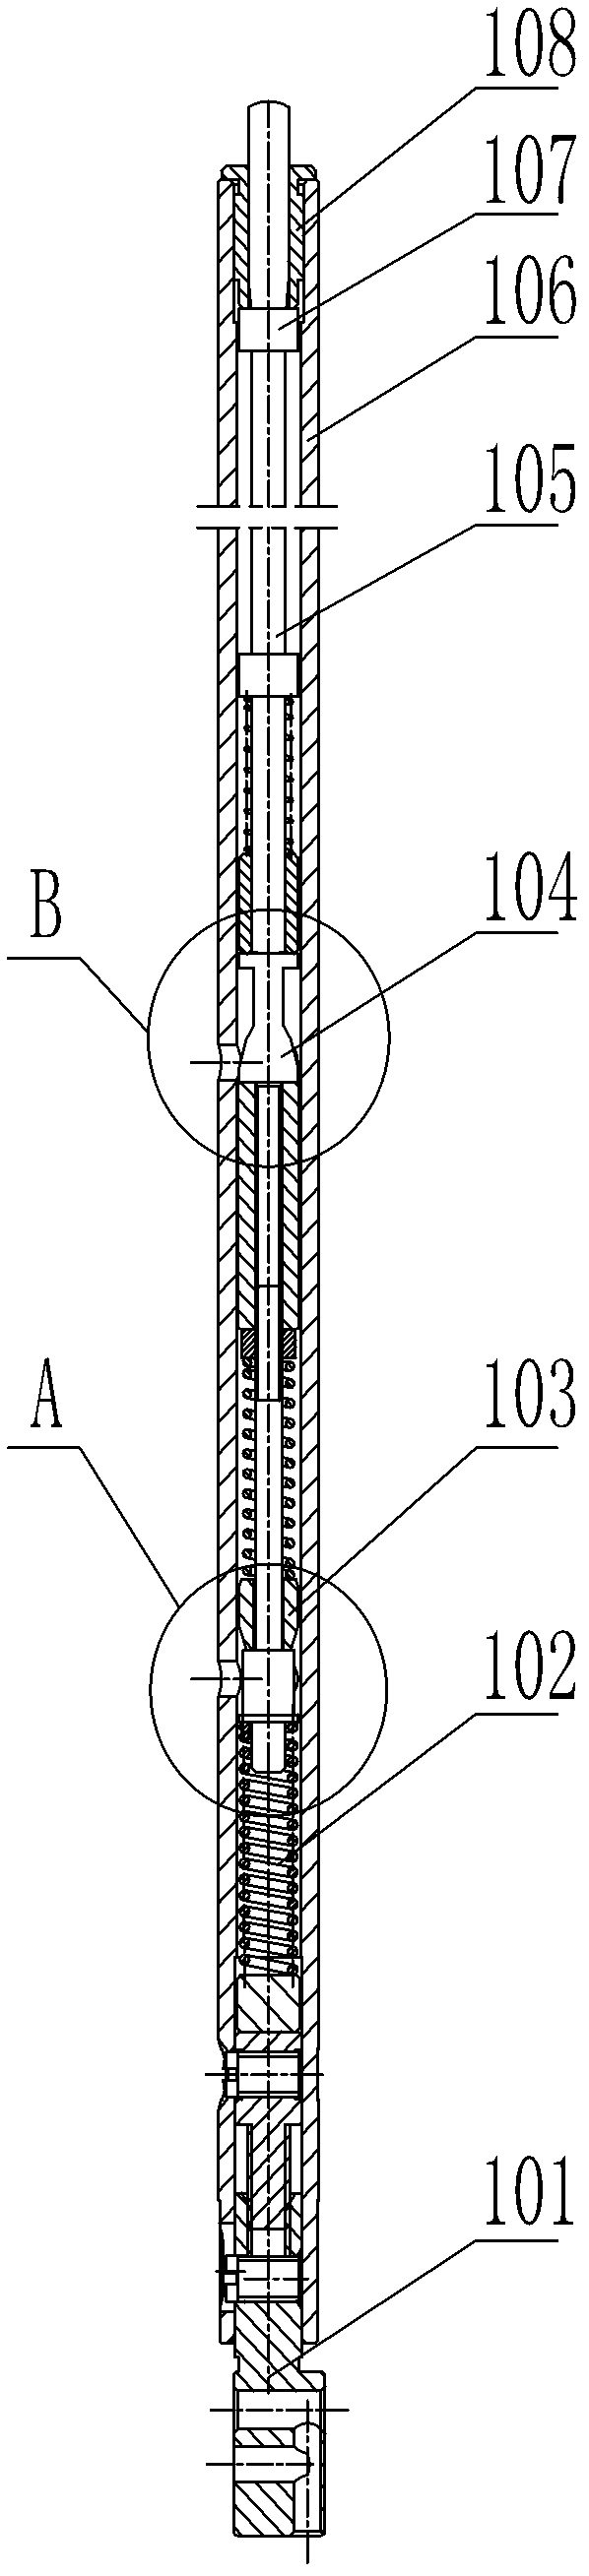 Needle rod for two-needle sewing machine, and switching mechanism for needle rod